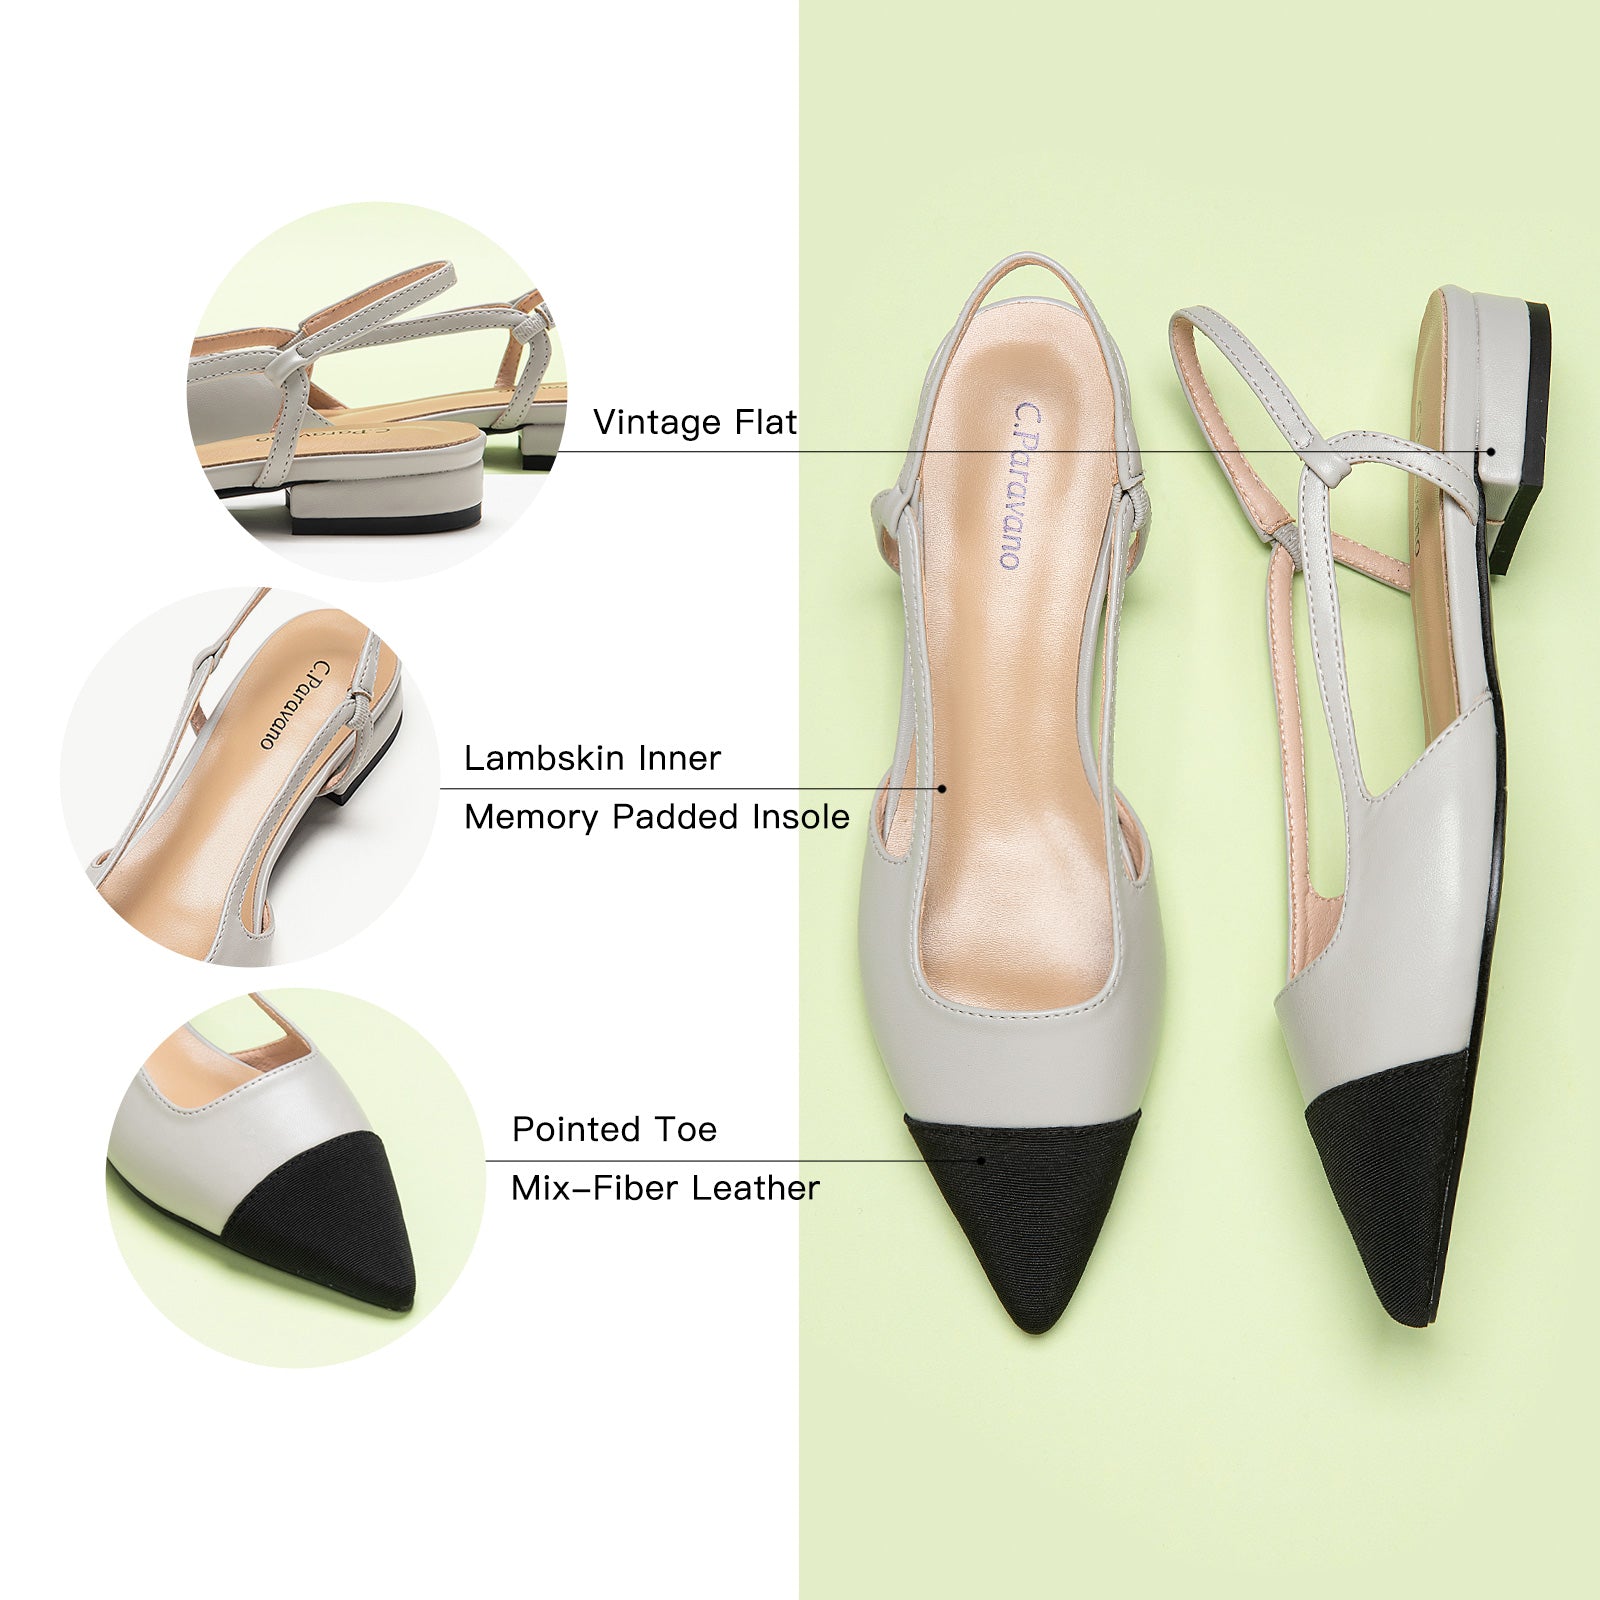 Grey Pointe Toe Flats with a slingback, perfect for a confident and fashionable look in any urban setting